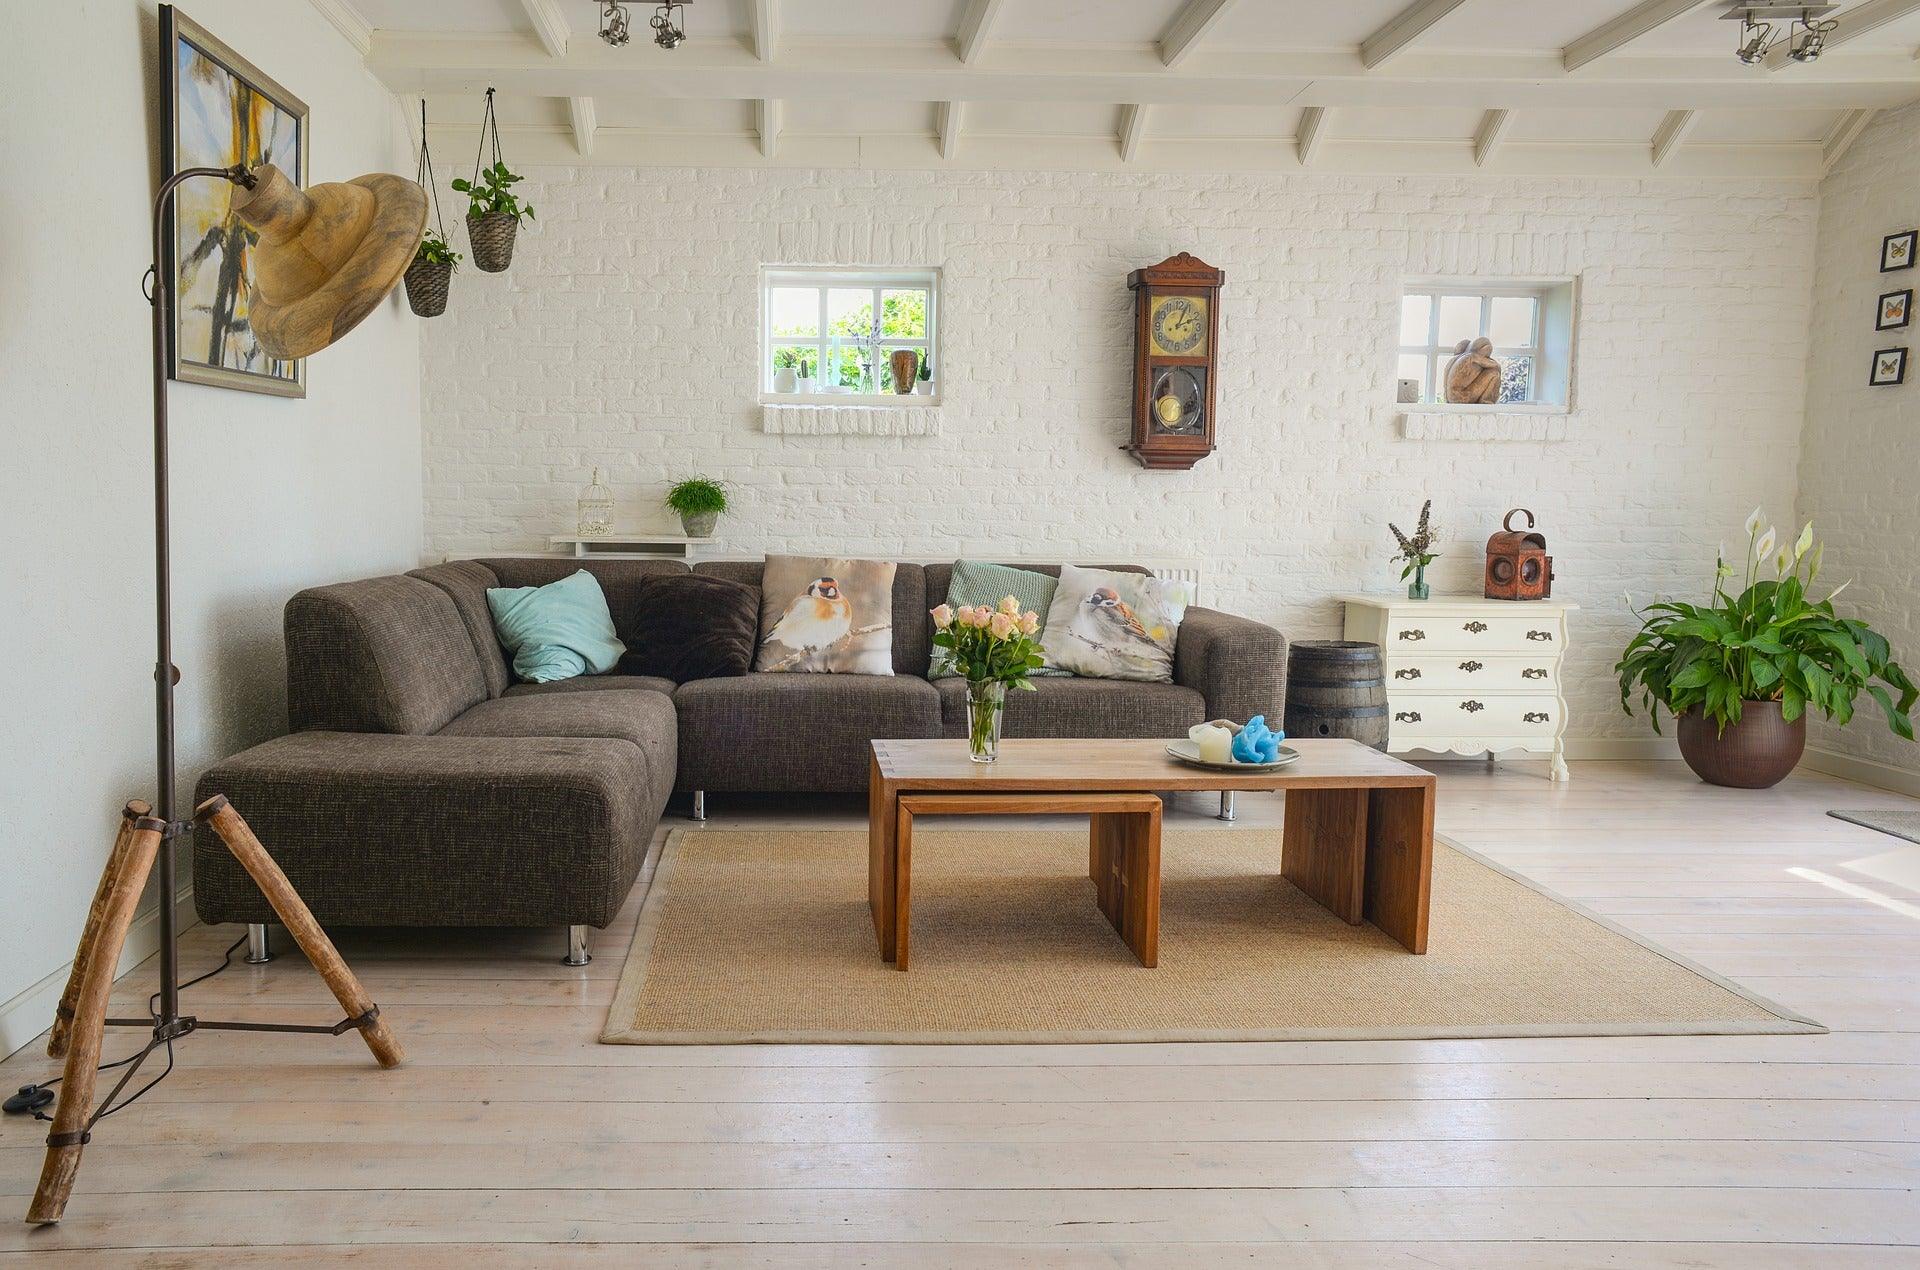 10 Furniture Tips to Make Your Apartment Look Your Age